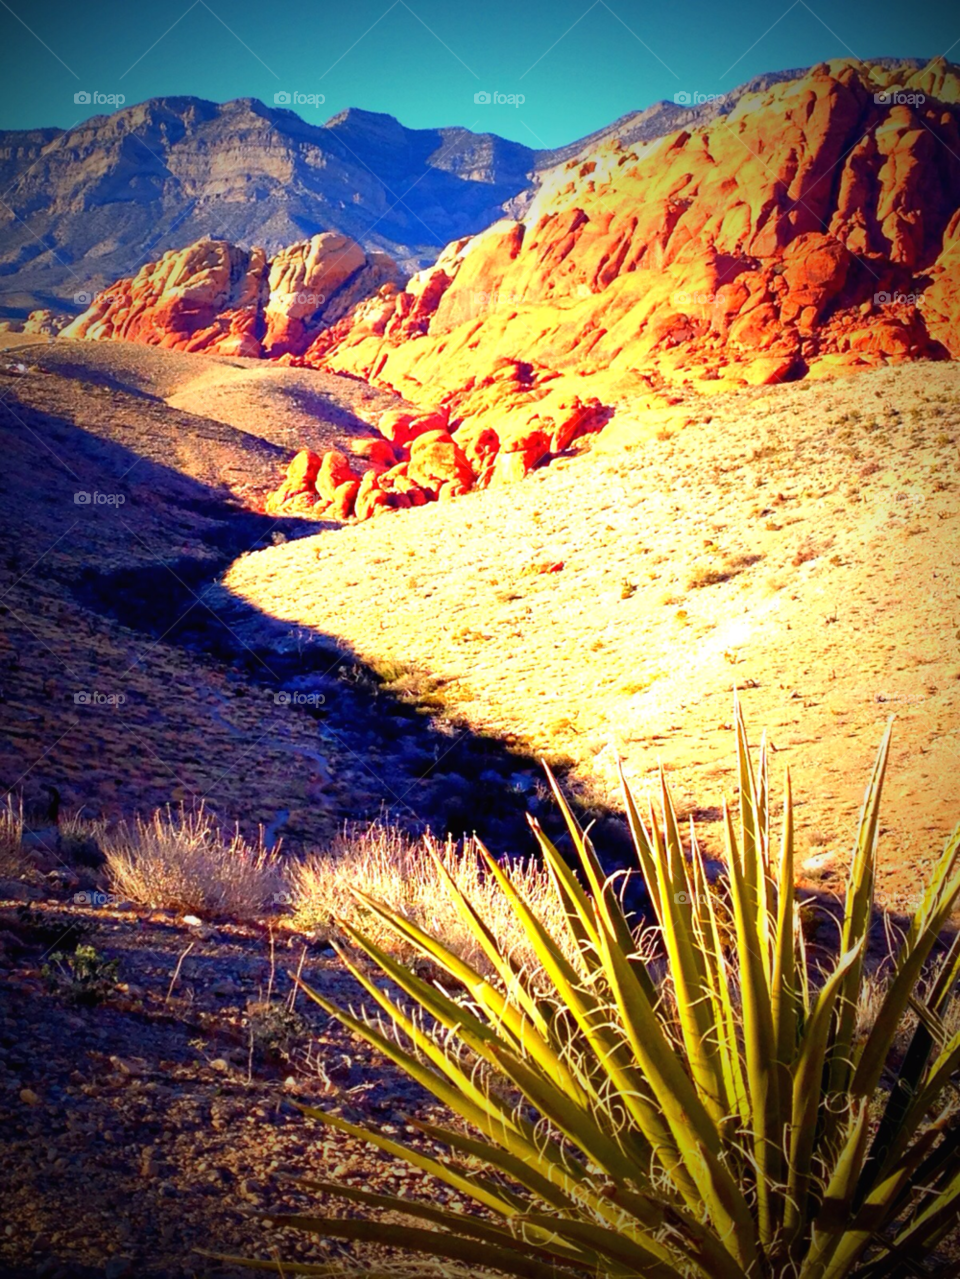 red rock canyon nevada nature colorful mountains by stevehardley7